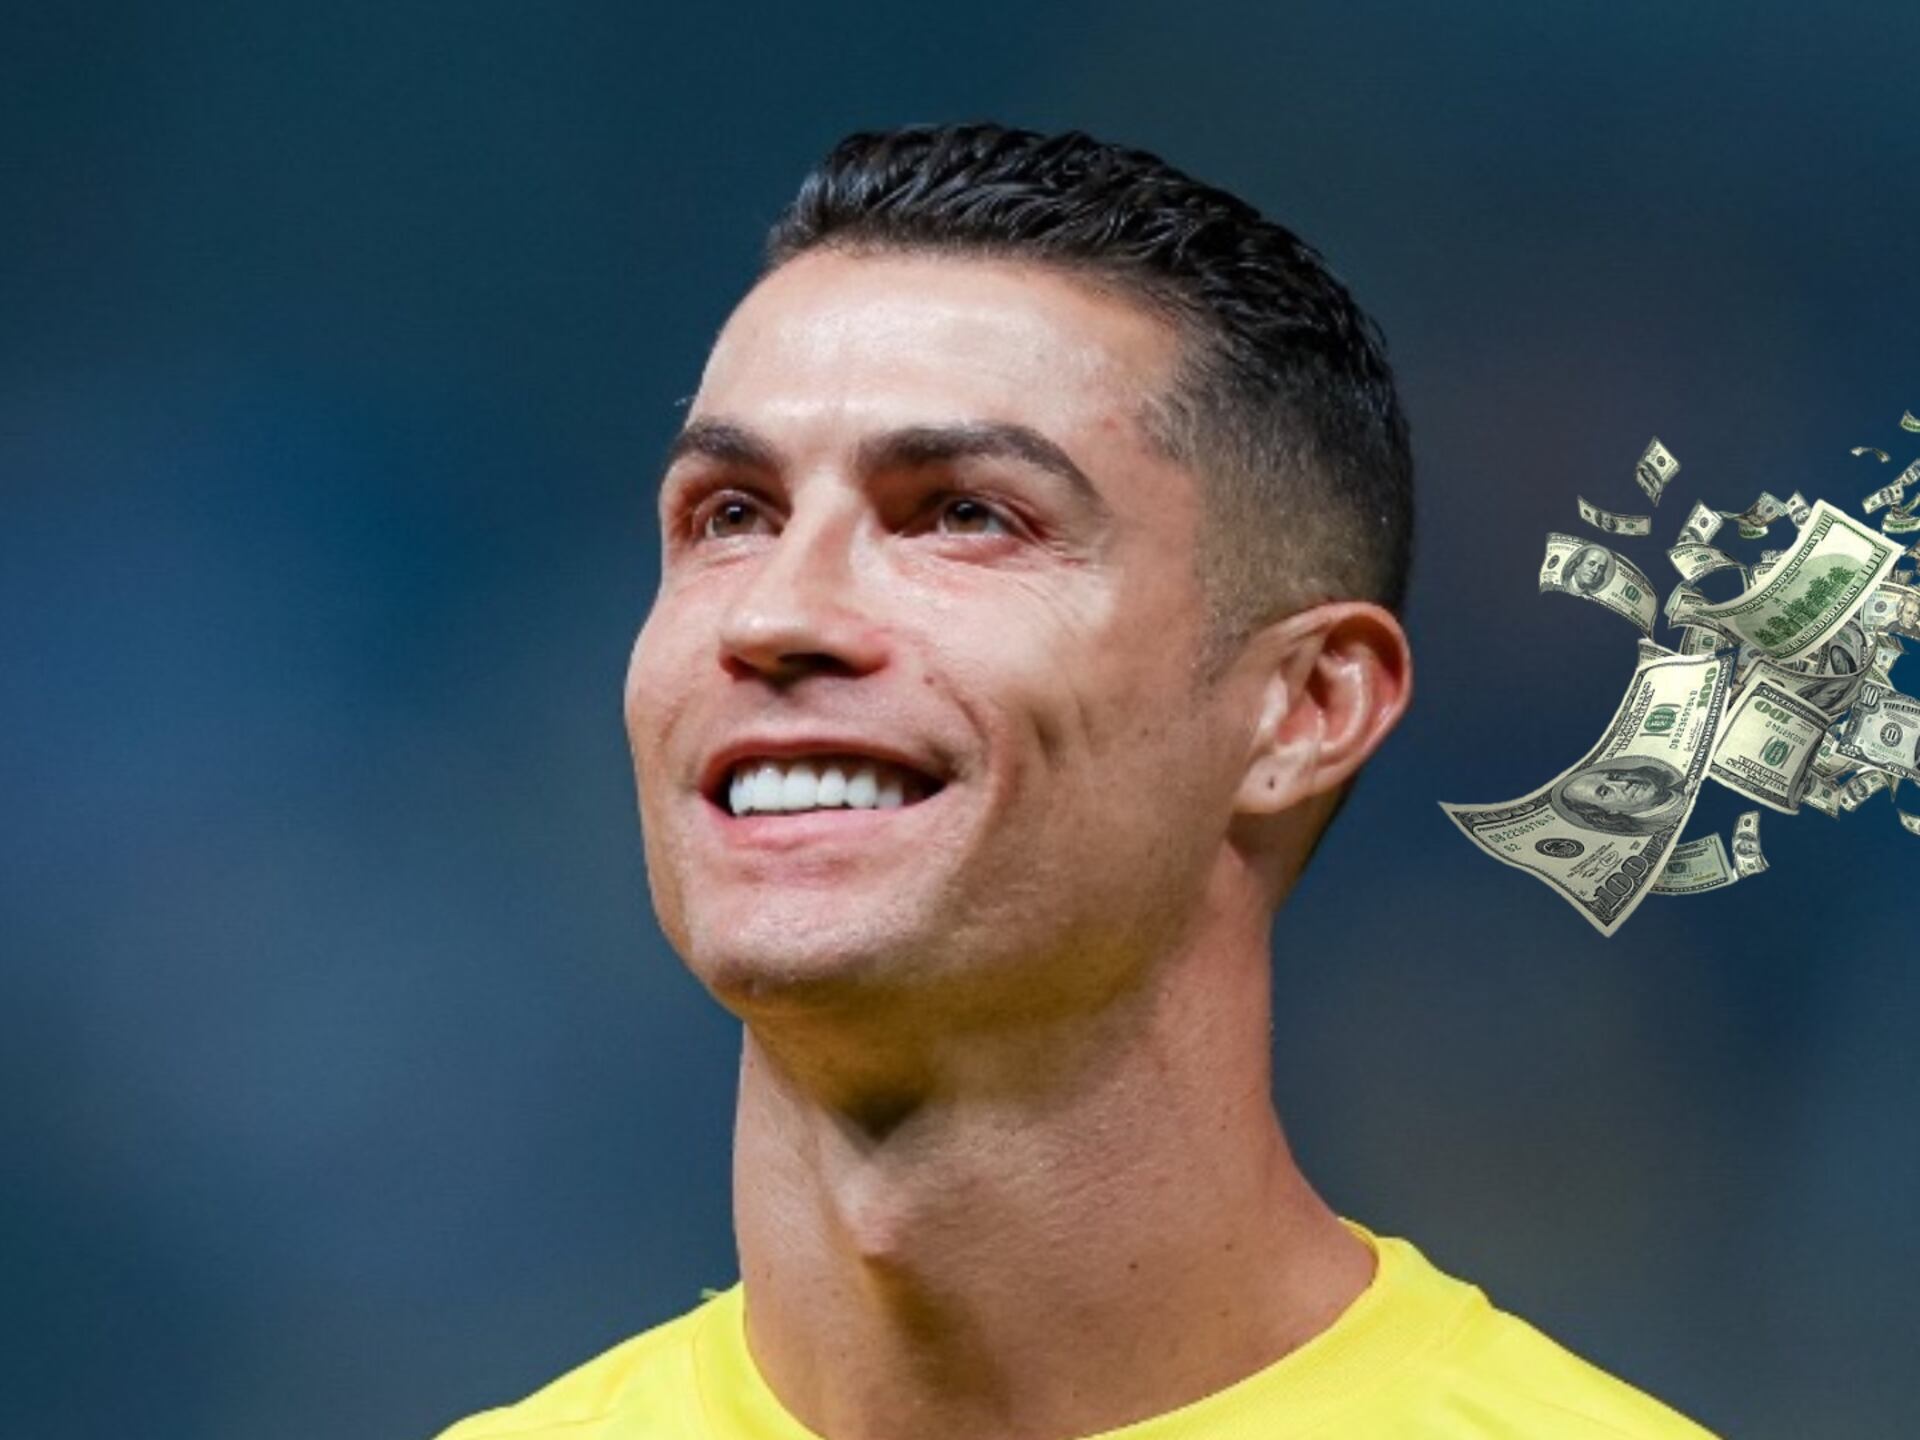 Would you like to work for Cristiano Ronaldo? The job CR7 offers, what you have to do and the incredible benefits